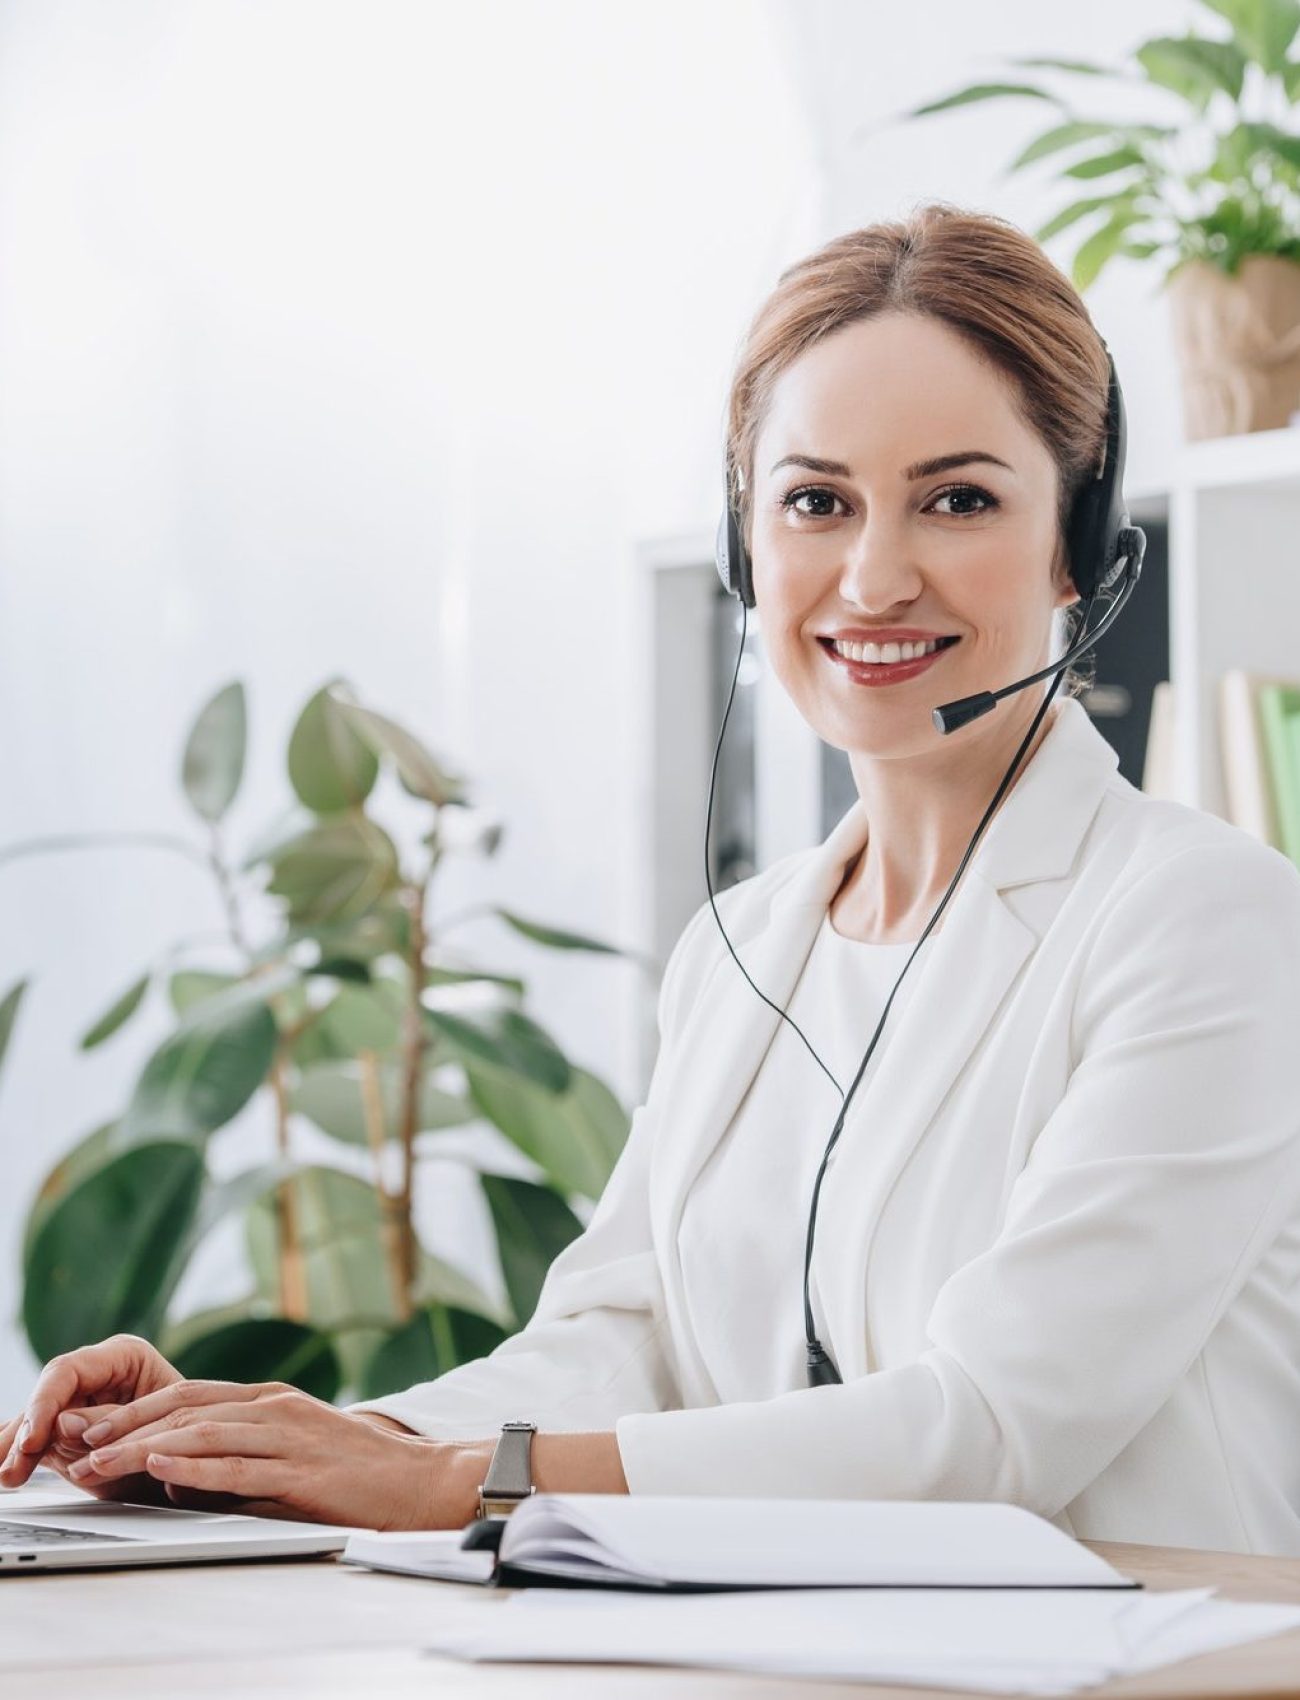 support-operator-working-with-headset-and-laptop-in-call-center-e1622090004440.jpg